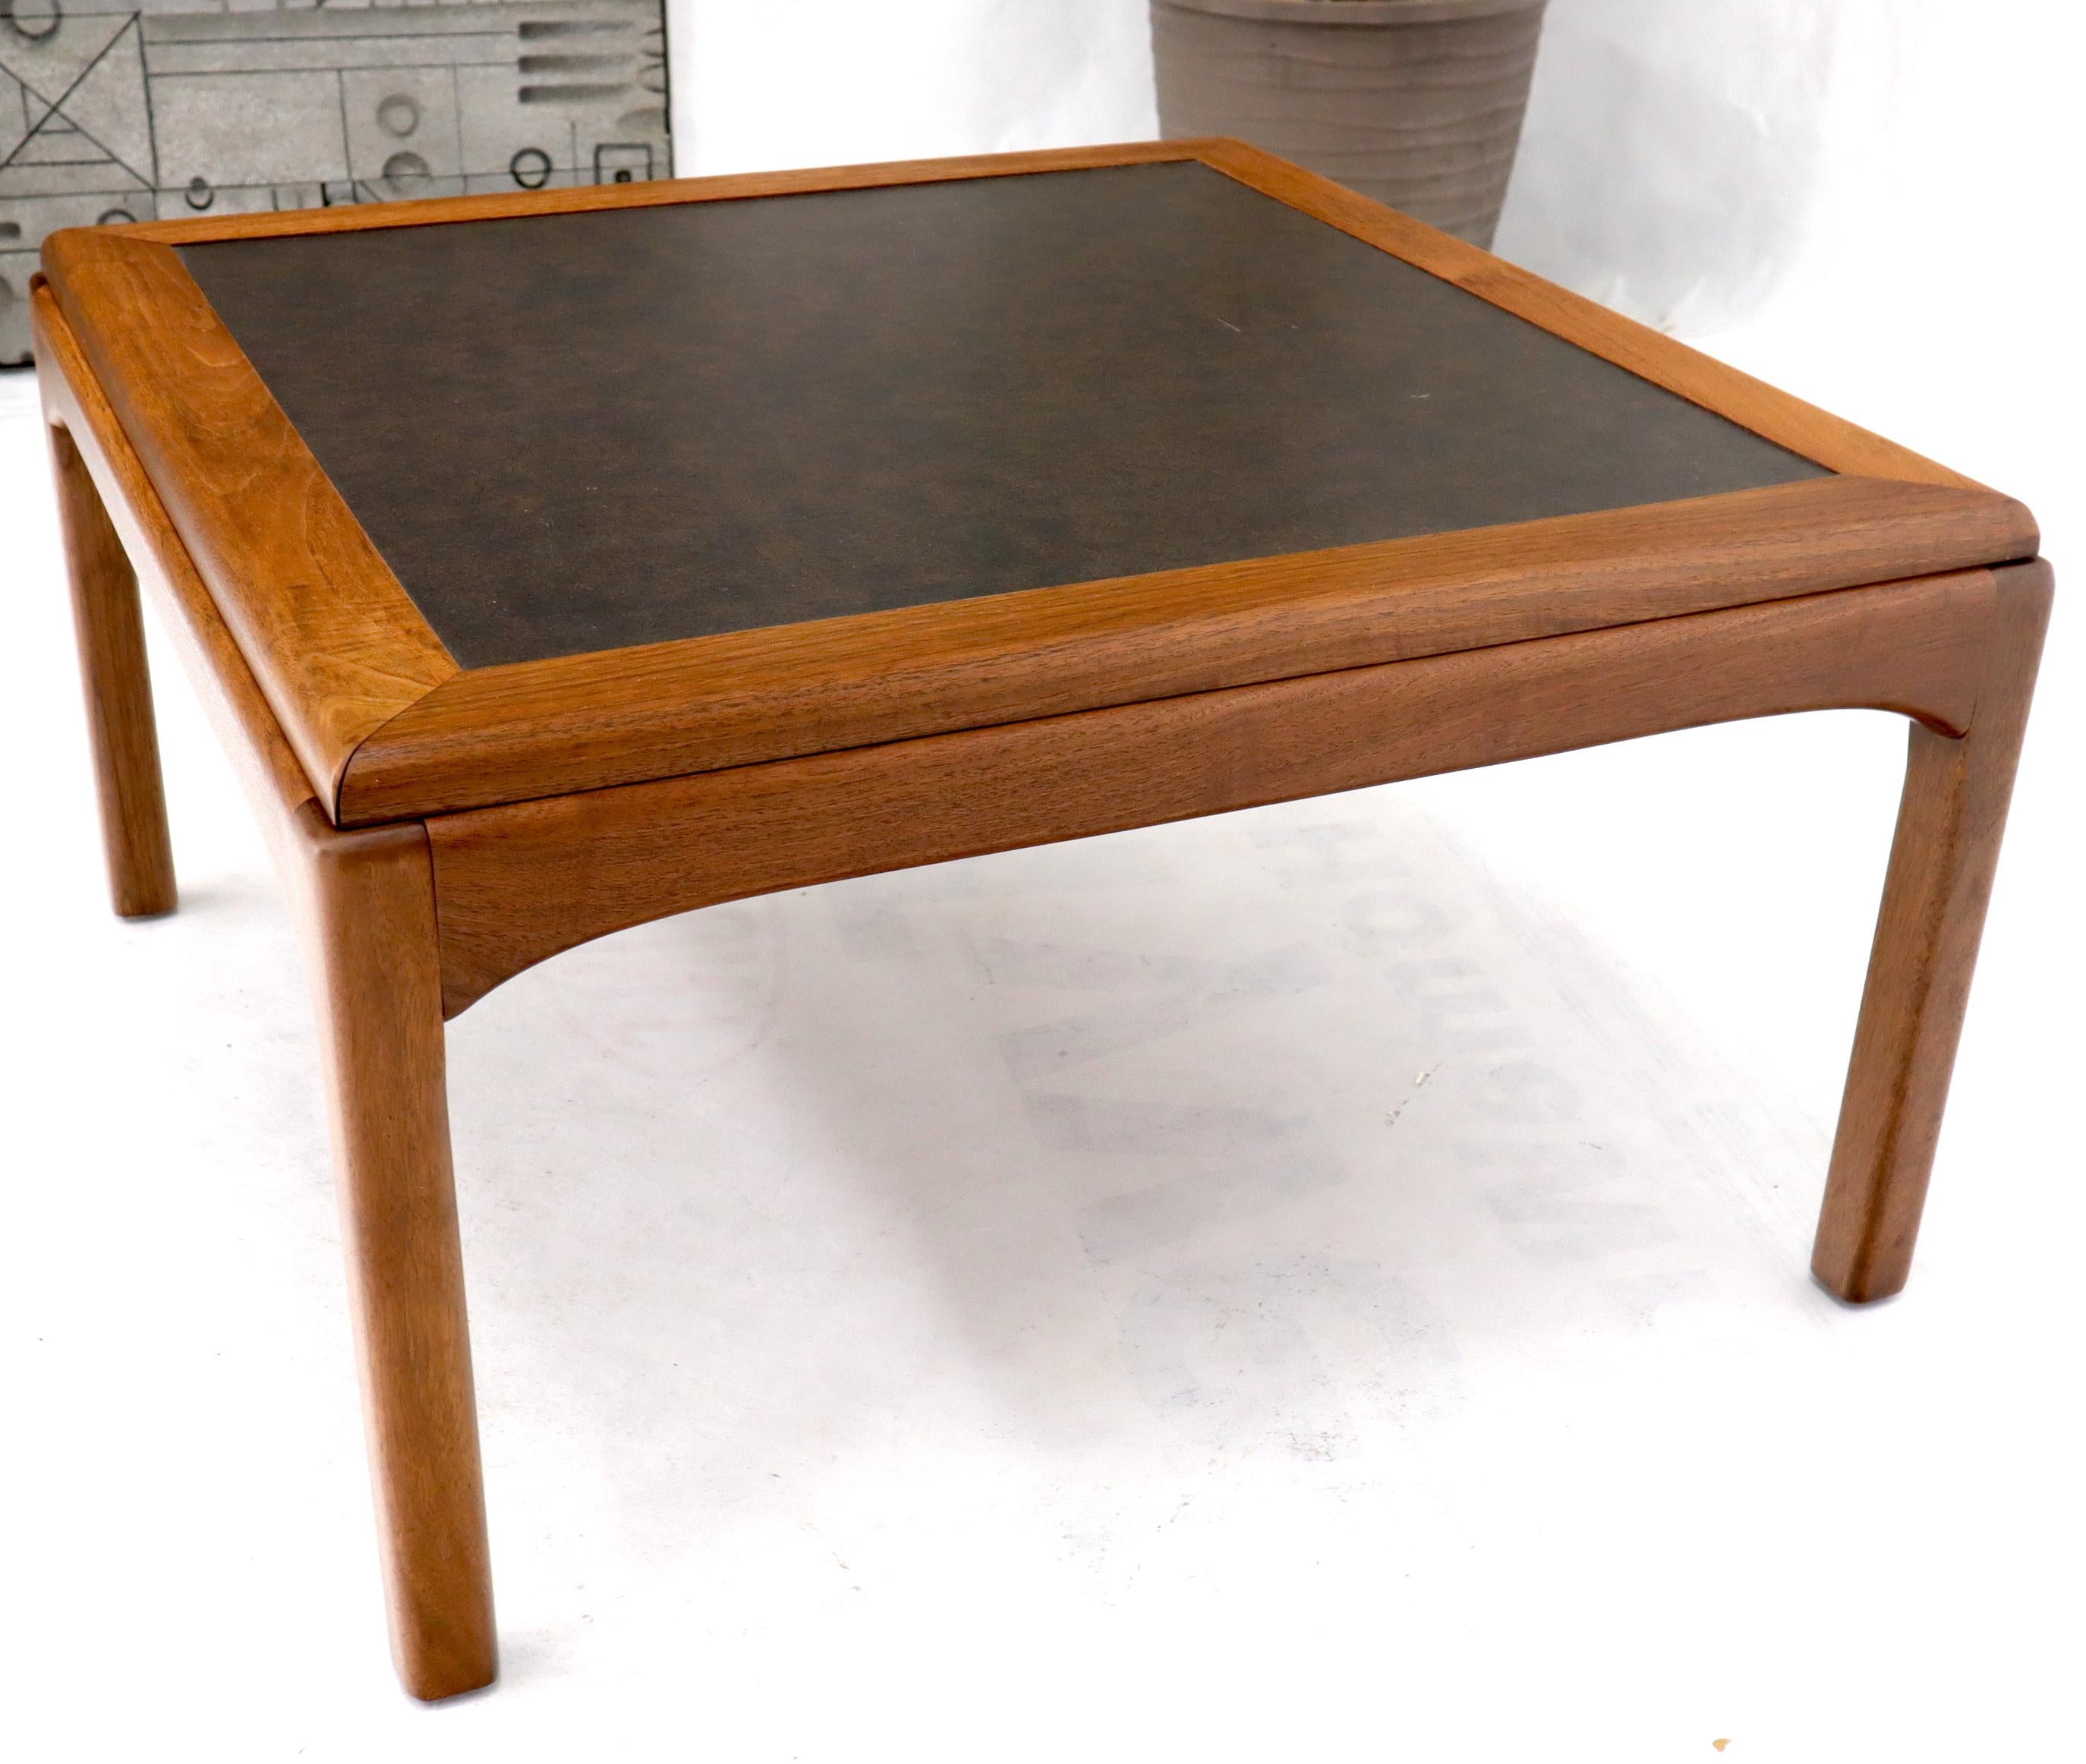 Square Oiled Walnut Faux Slate Top Coffee Table In Excellent Condition For Sale In Rockaway, NJ